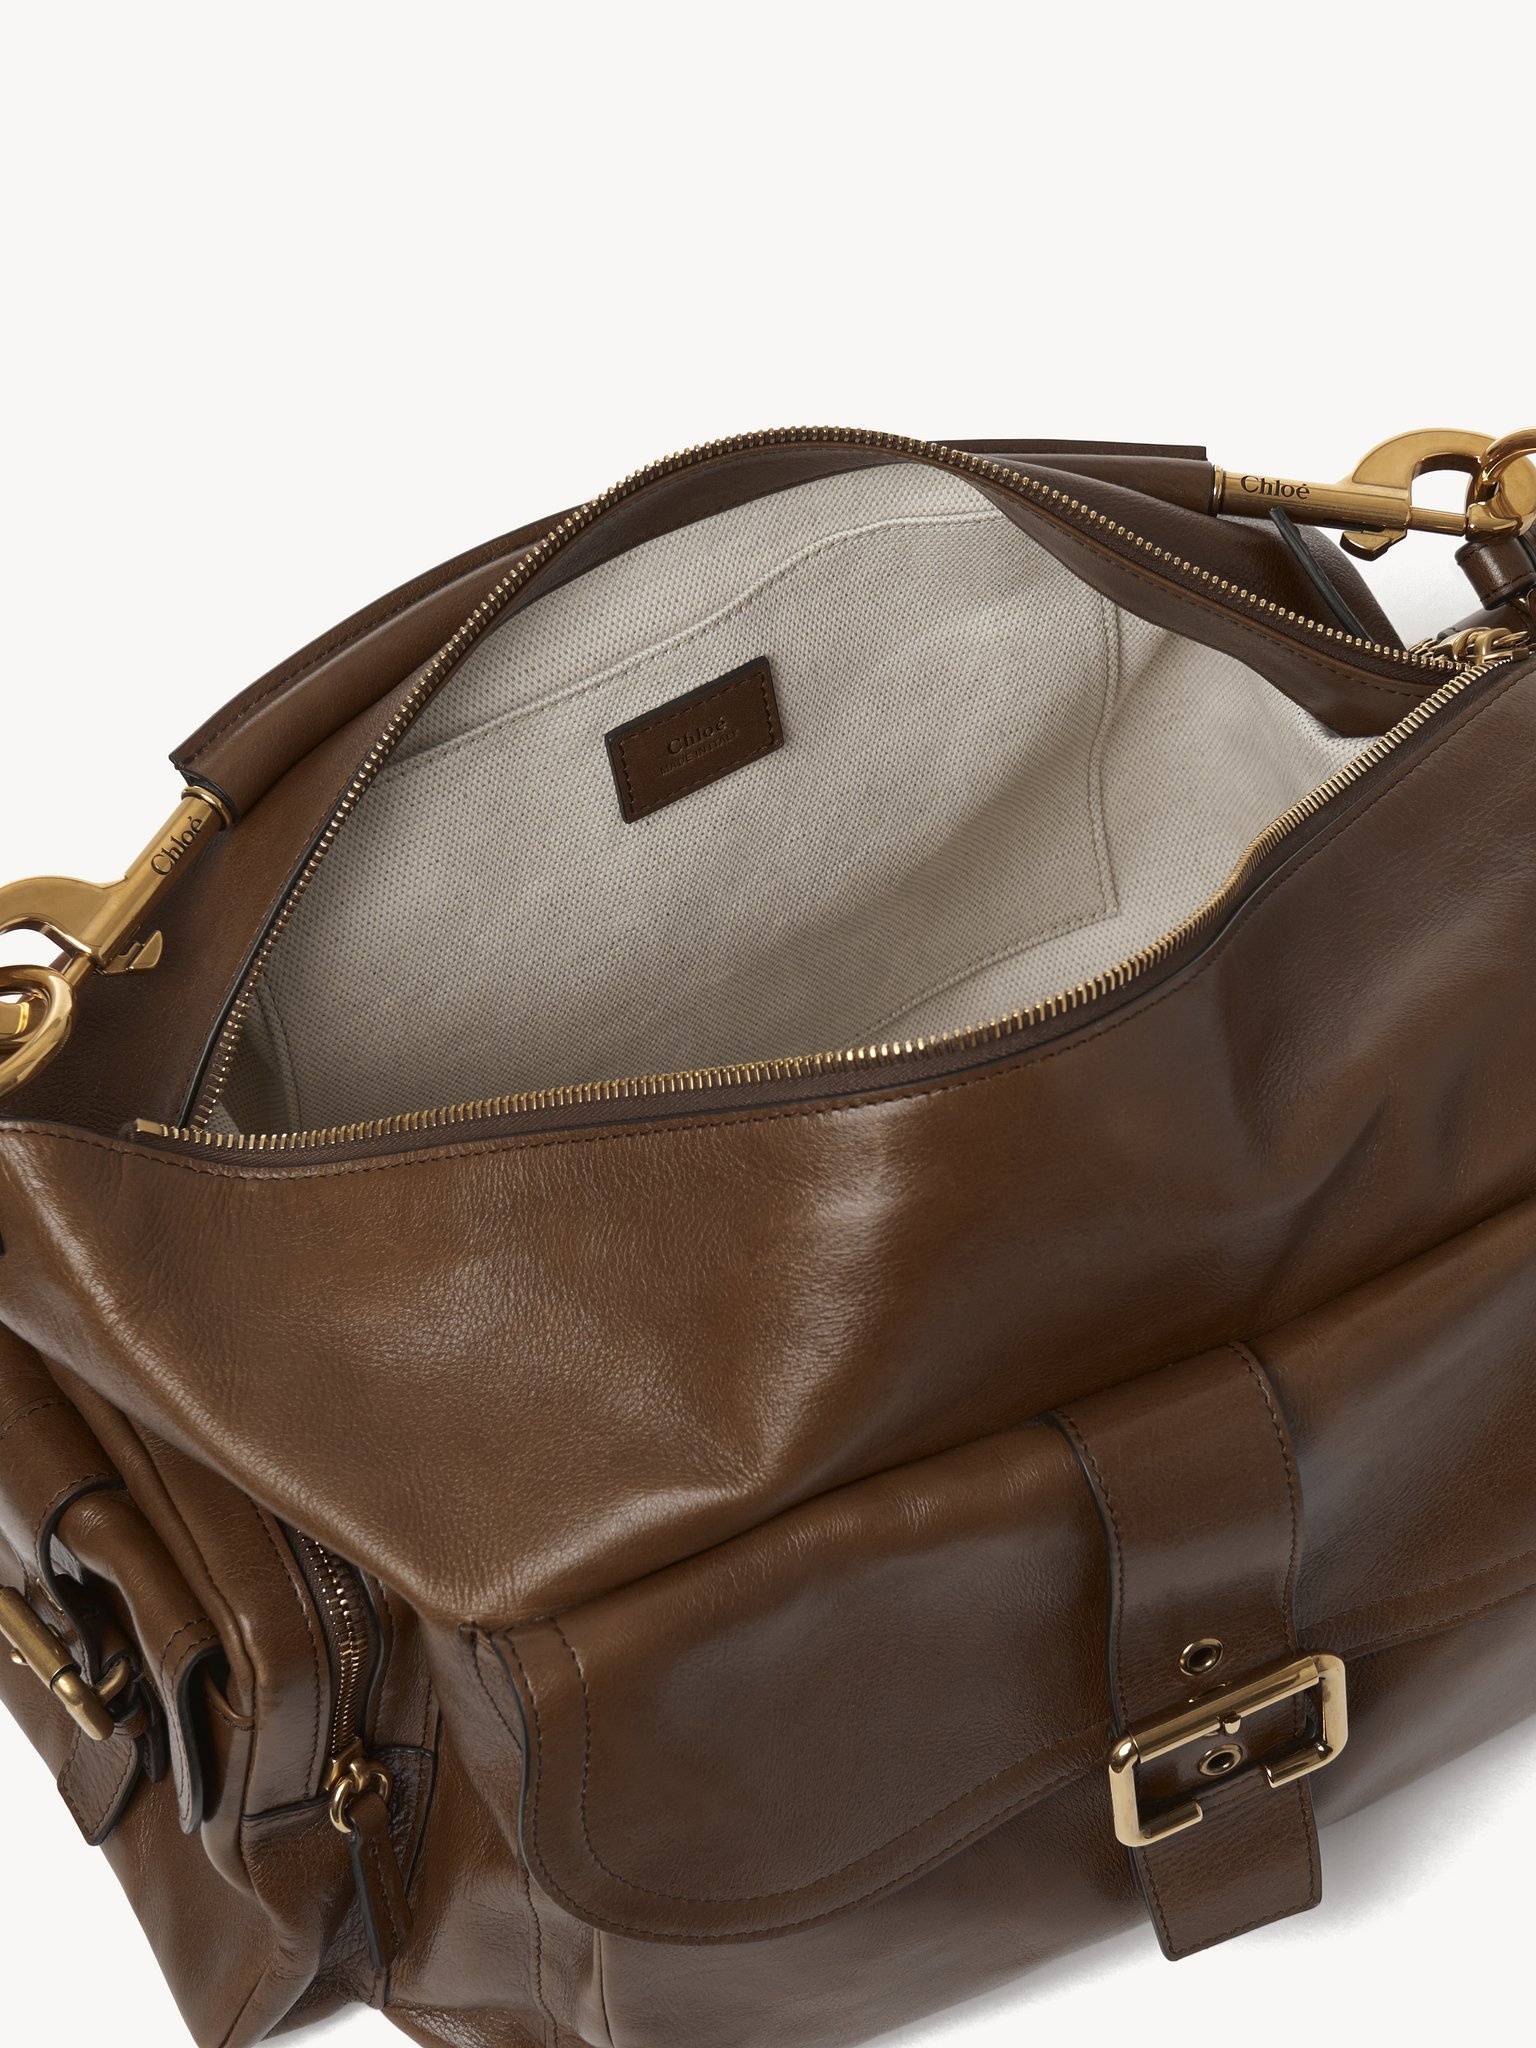 LARGE CAMERA BAG IN SOFT LEATHER - 4